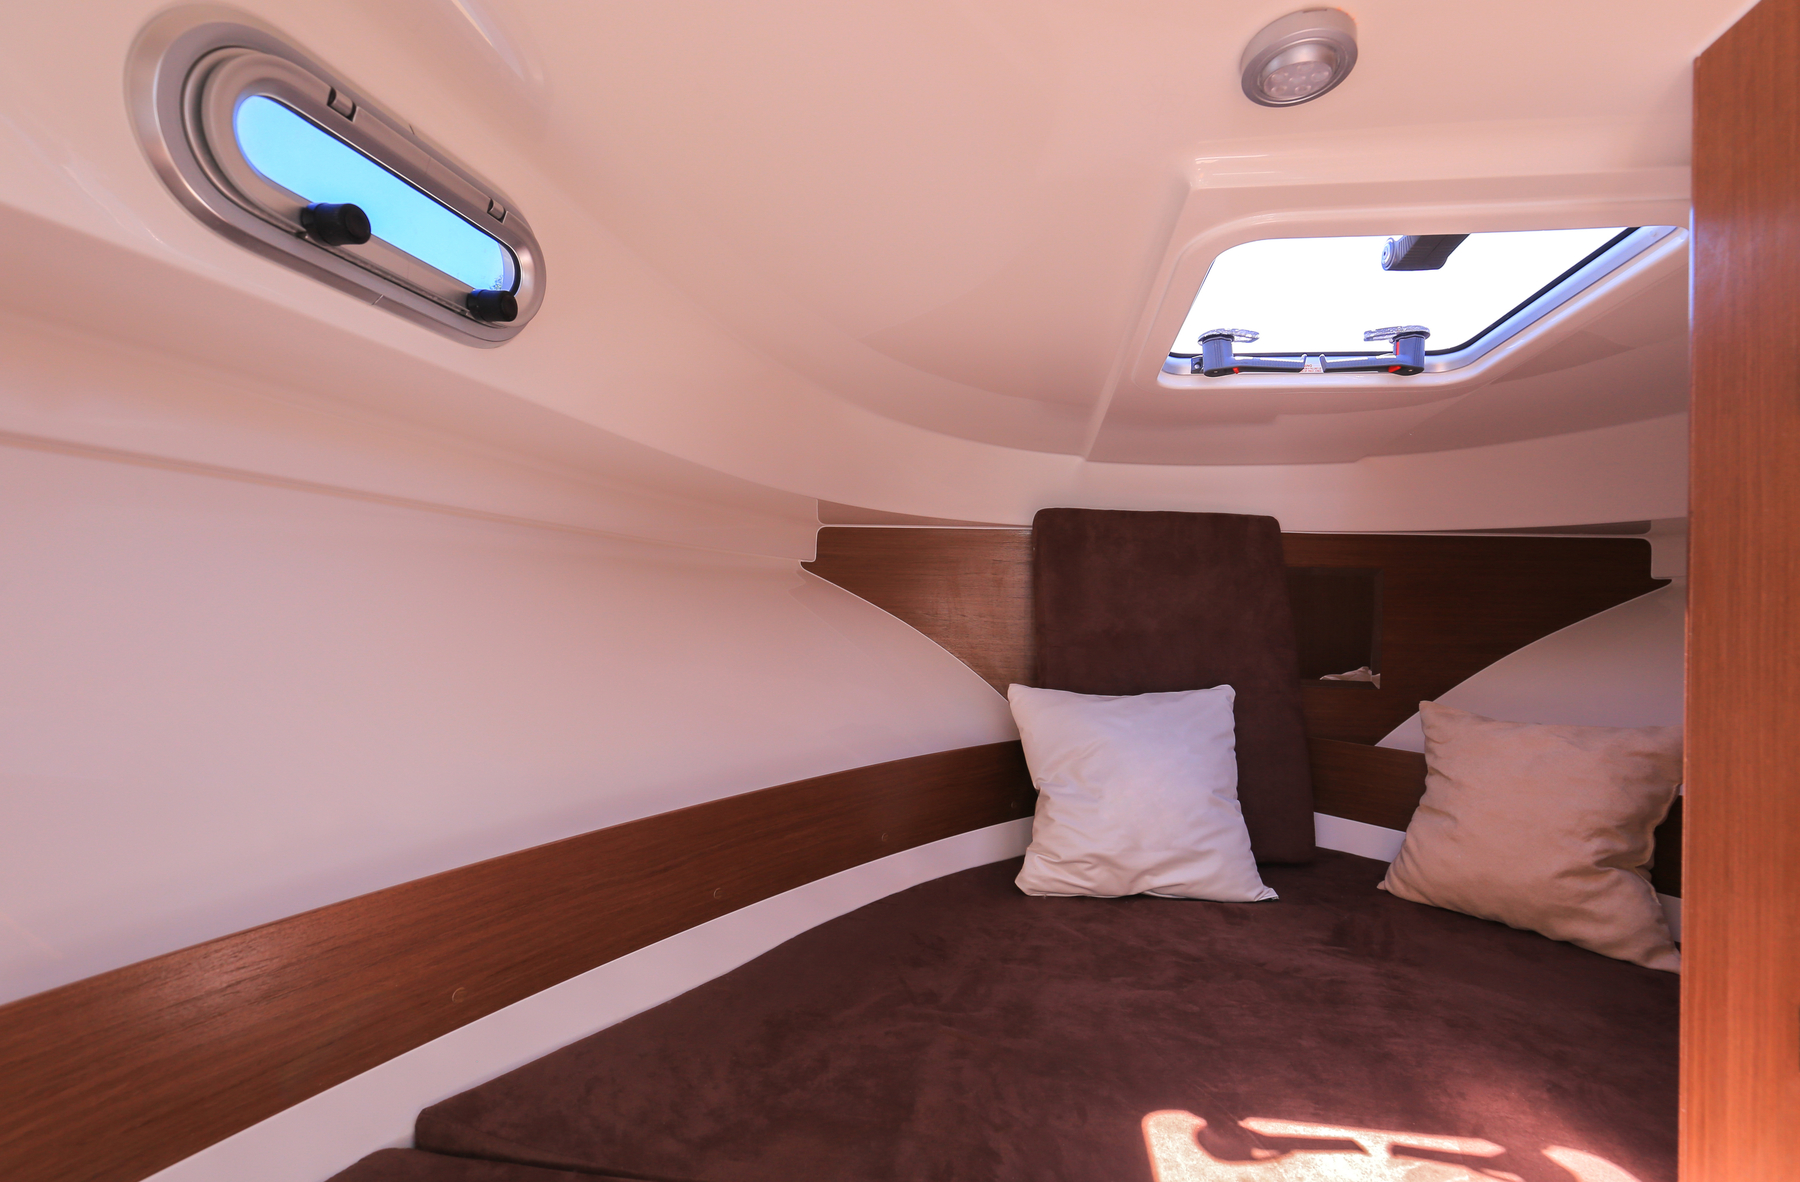 Boat bedding is a key part of onboard comfort, especially on long distance adventures. Photo: Viktorius/Pond5.